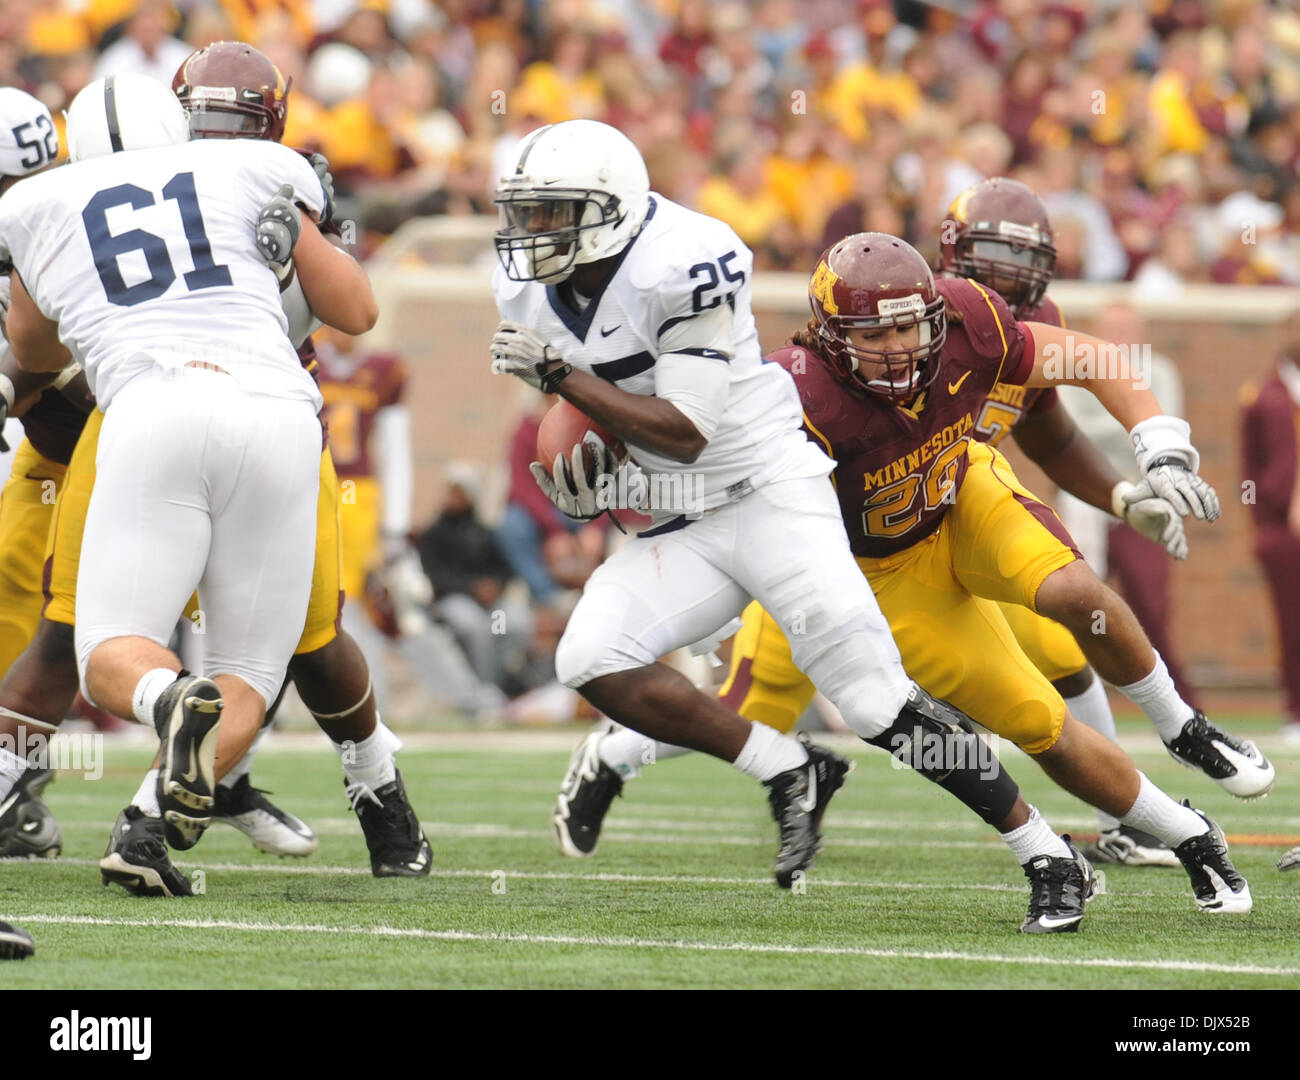 Oct. 23, 2010 - Minneapolis, Minnesota, United States of America - Penn State University tail back Silas Redd (#25) rushes for 20 yards in the fourth quarter of the game between the Minnesota Gophers and the Penn State Nittany Lions at the TCF Stadium in Minneapolis, Minnesota.  Penn State defeats  Minnesota 33-21. (Credit Image: © Marilyn Indahl/Southcreek Global/ZUMApress.com) Stock Photo